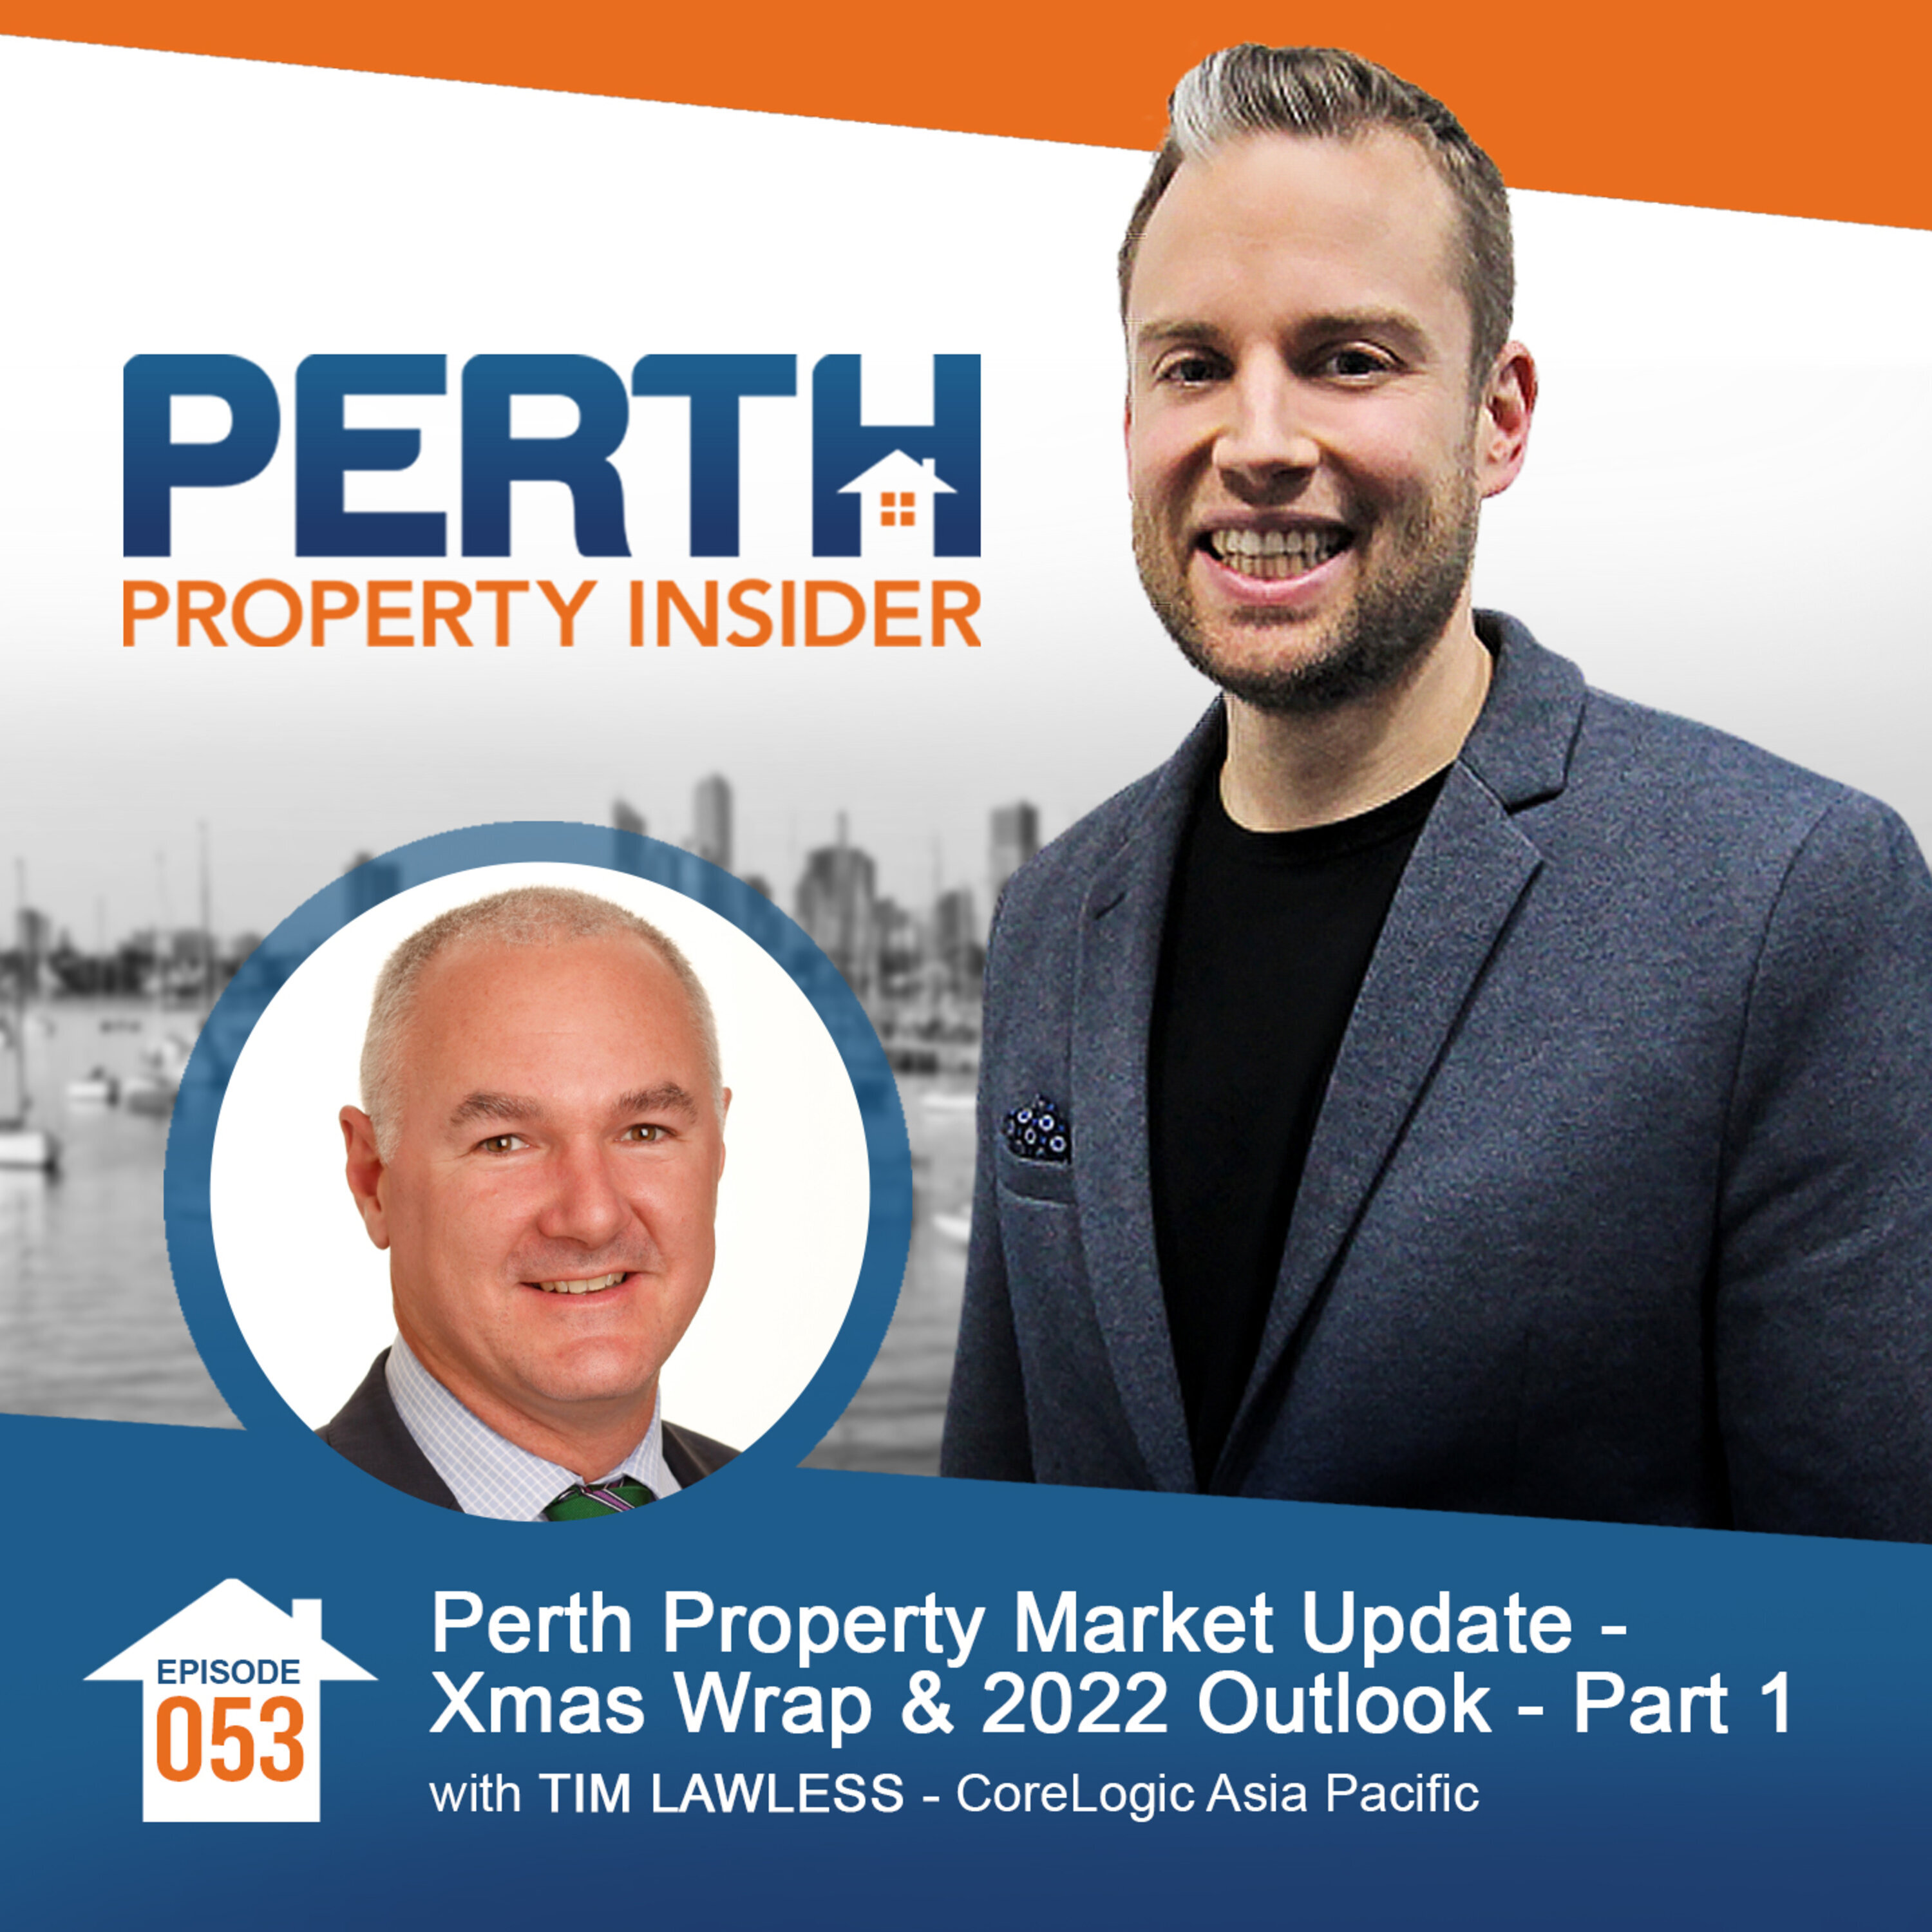 Perth Property Market Update - Xmas Wrap & 2022 Outlook With Tim Lawless - Part 1